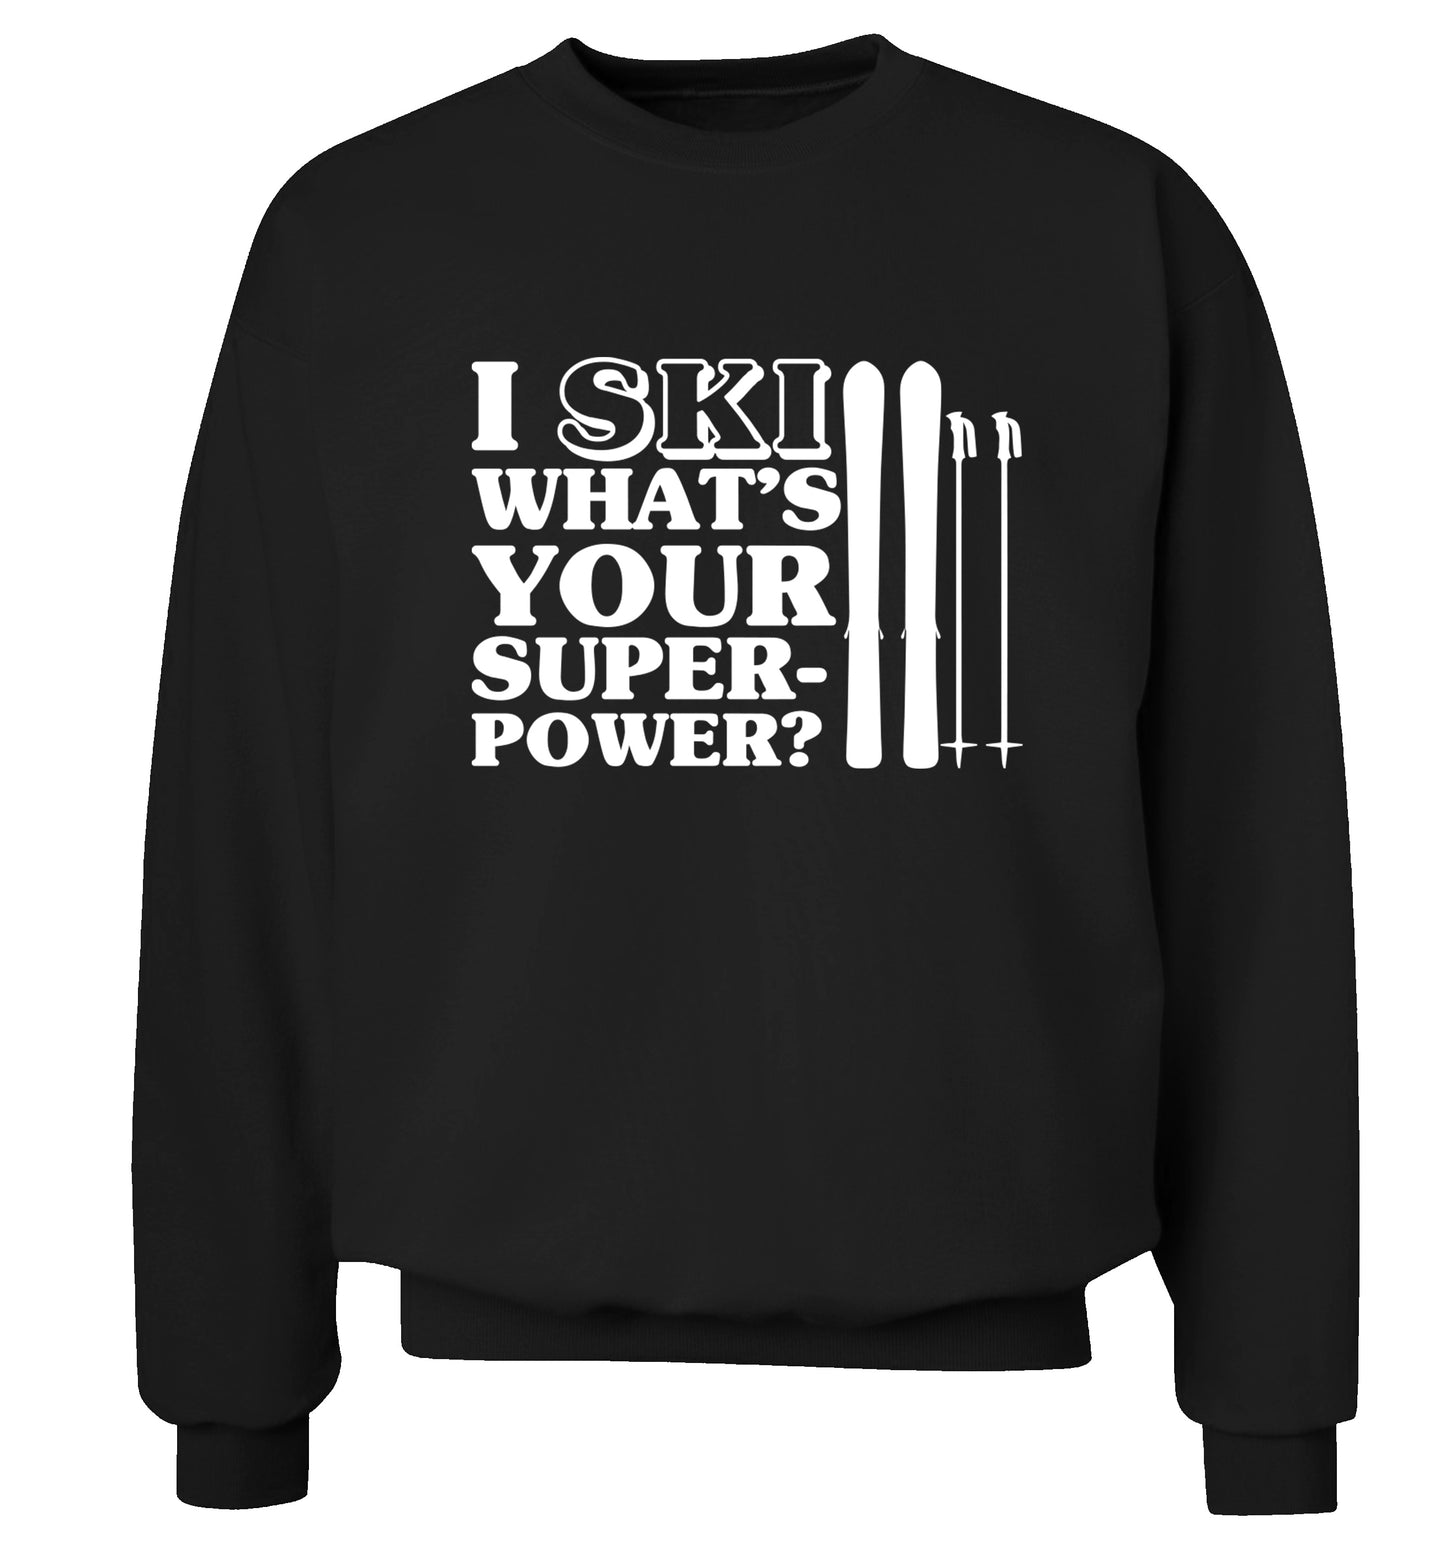 I ski what's your superpower? Adult's unisexblack Sweater 2XL